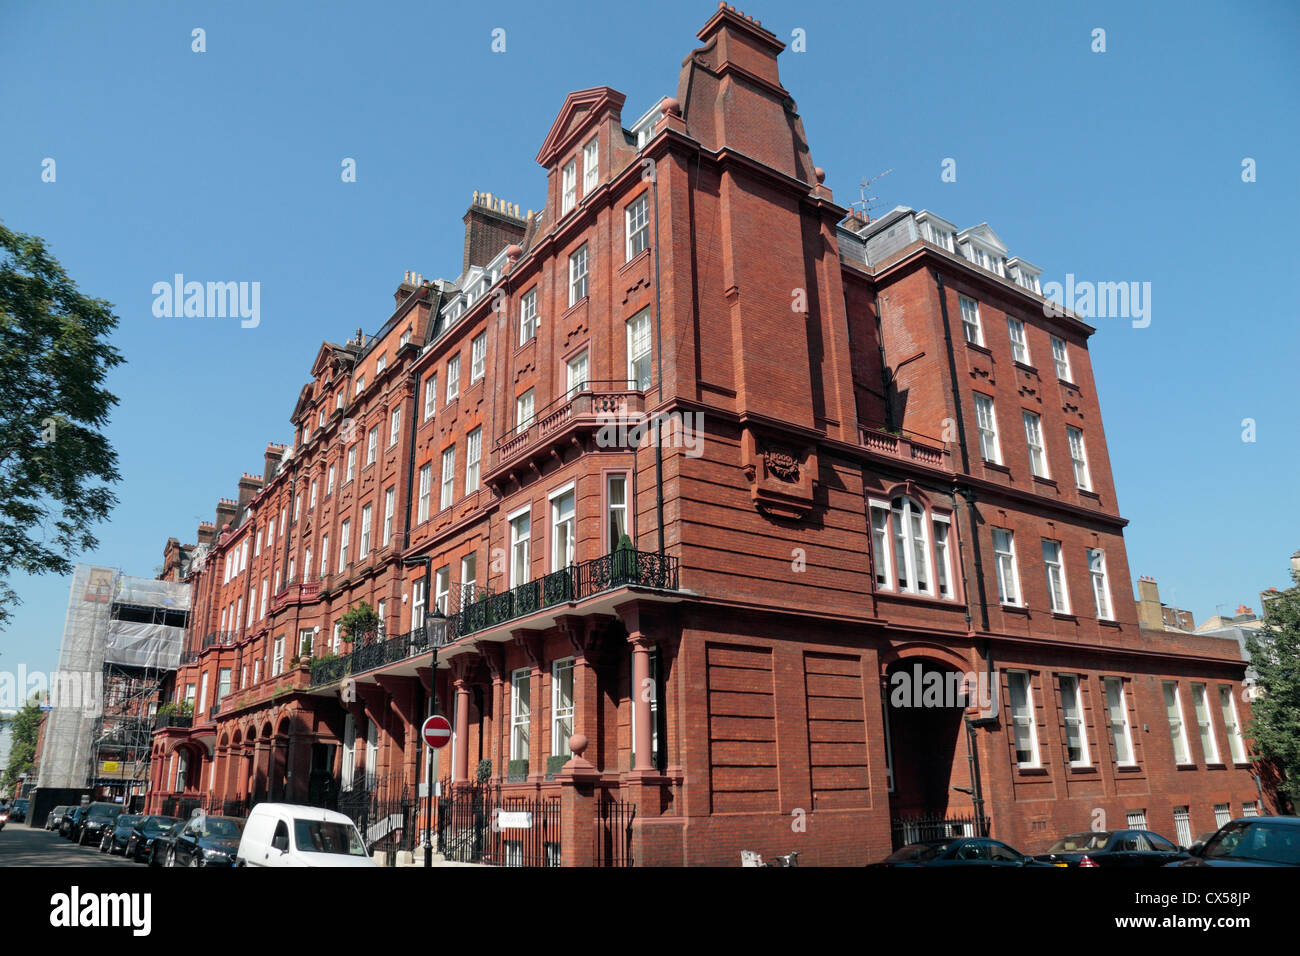 Typical 19th Century (1886) red brick Cadogan Trust properties on Cadogan Square in Chelsea, London, SW1 UK. Stock Photo